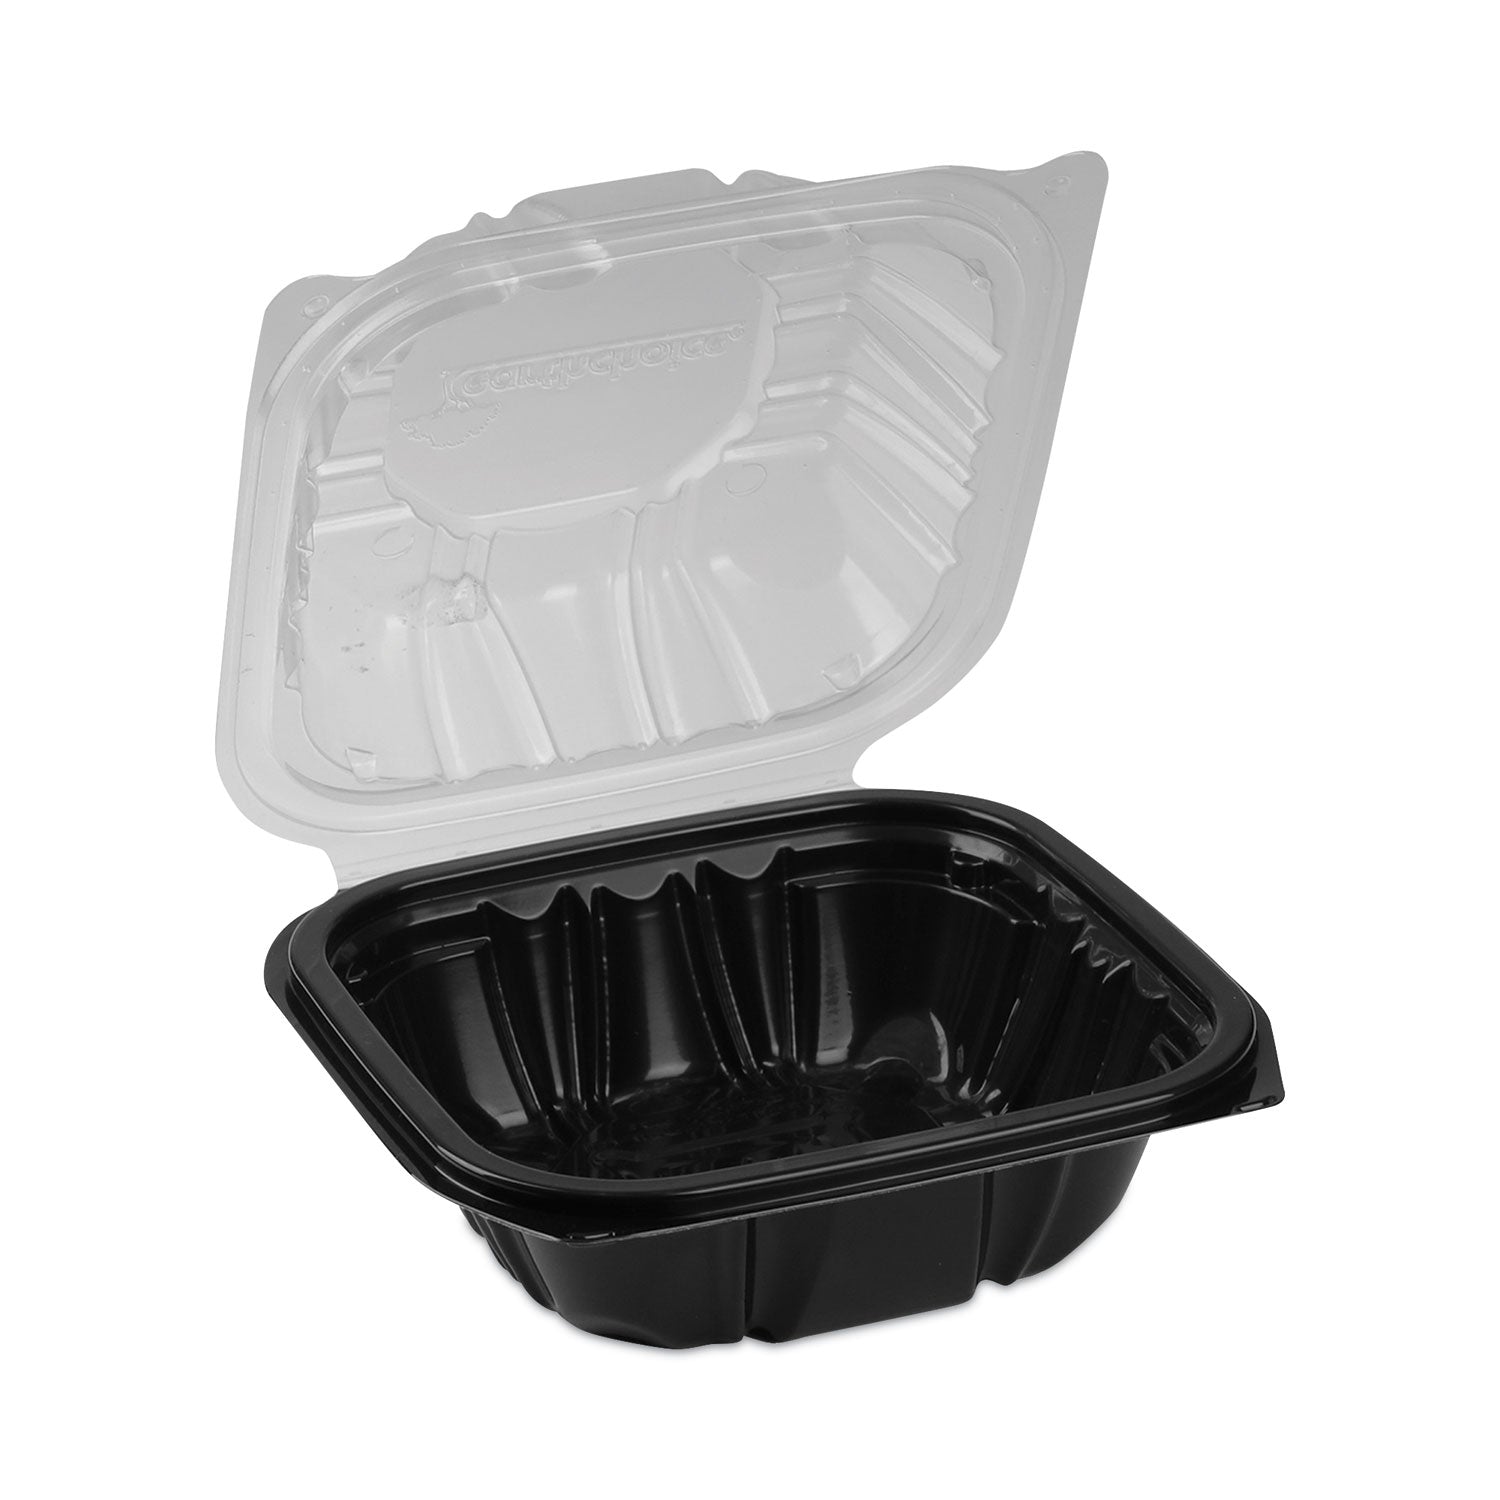 earthchoice-vented-dual-color-microwavable-hinged-lid-container-1-compartment-16oz-6-x-6-x-3-black-clear-plastic-321-ct_pctdc6610b000 - 2